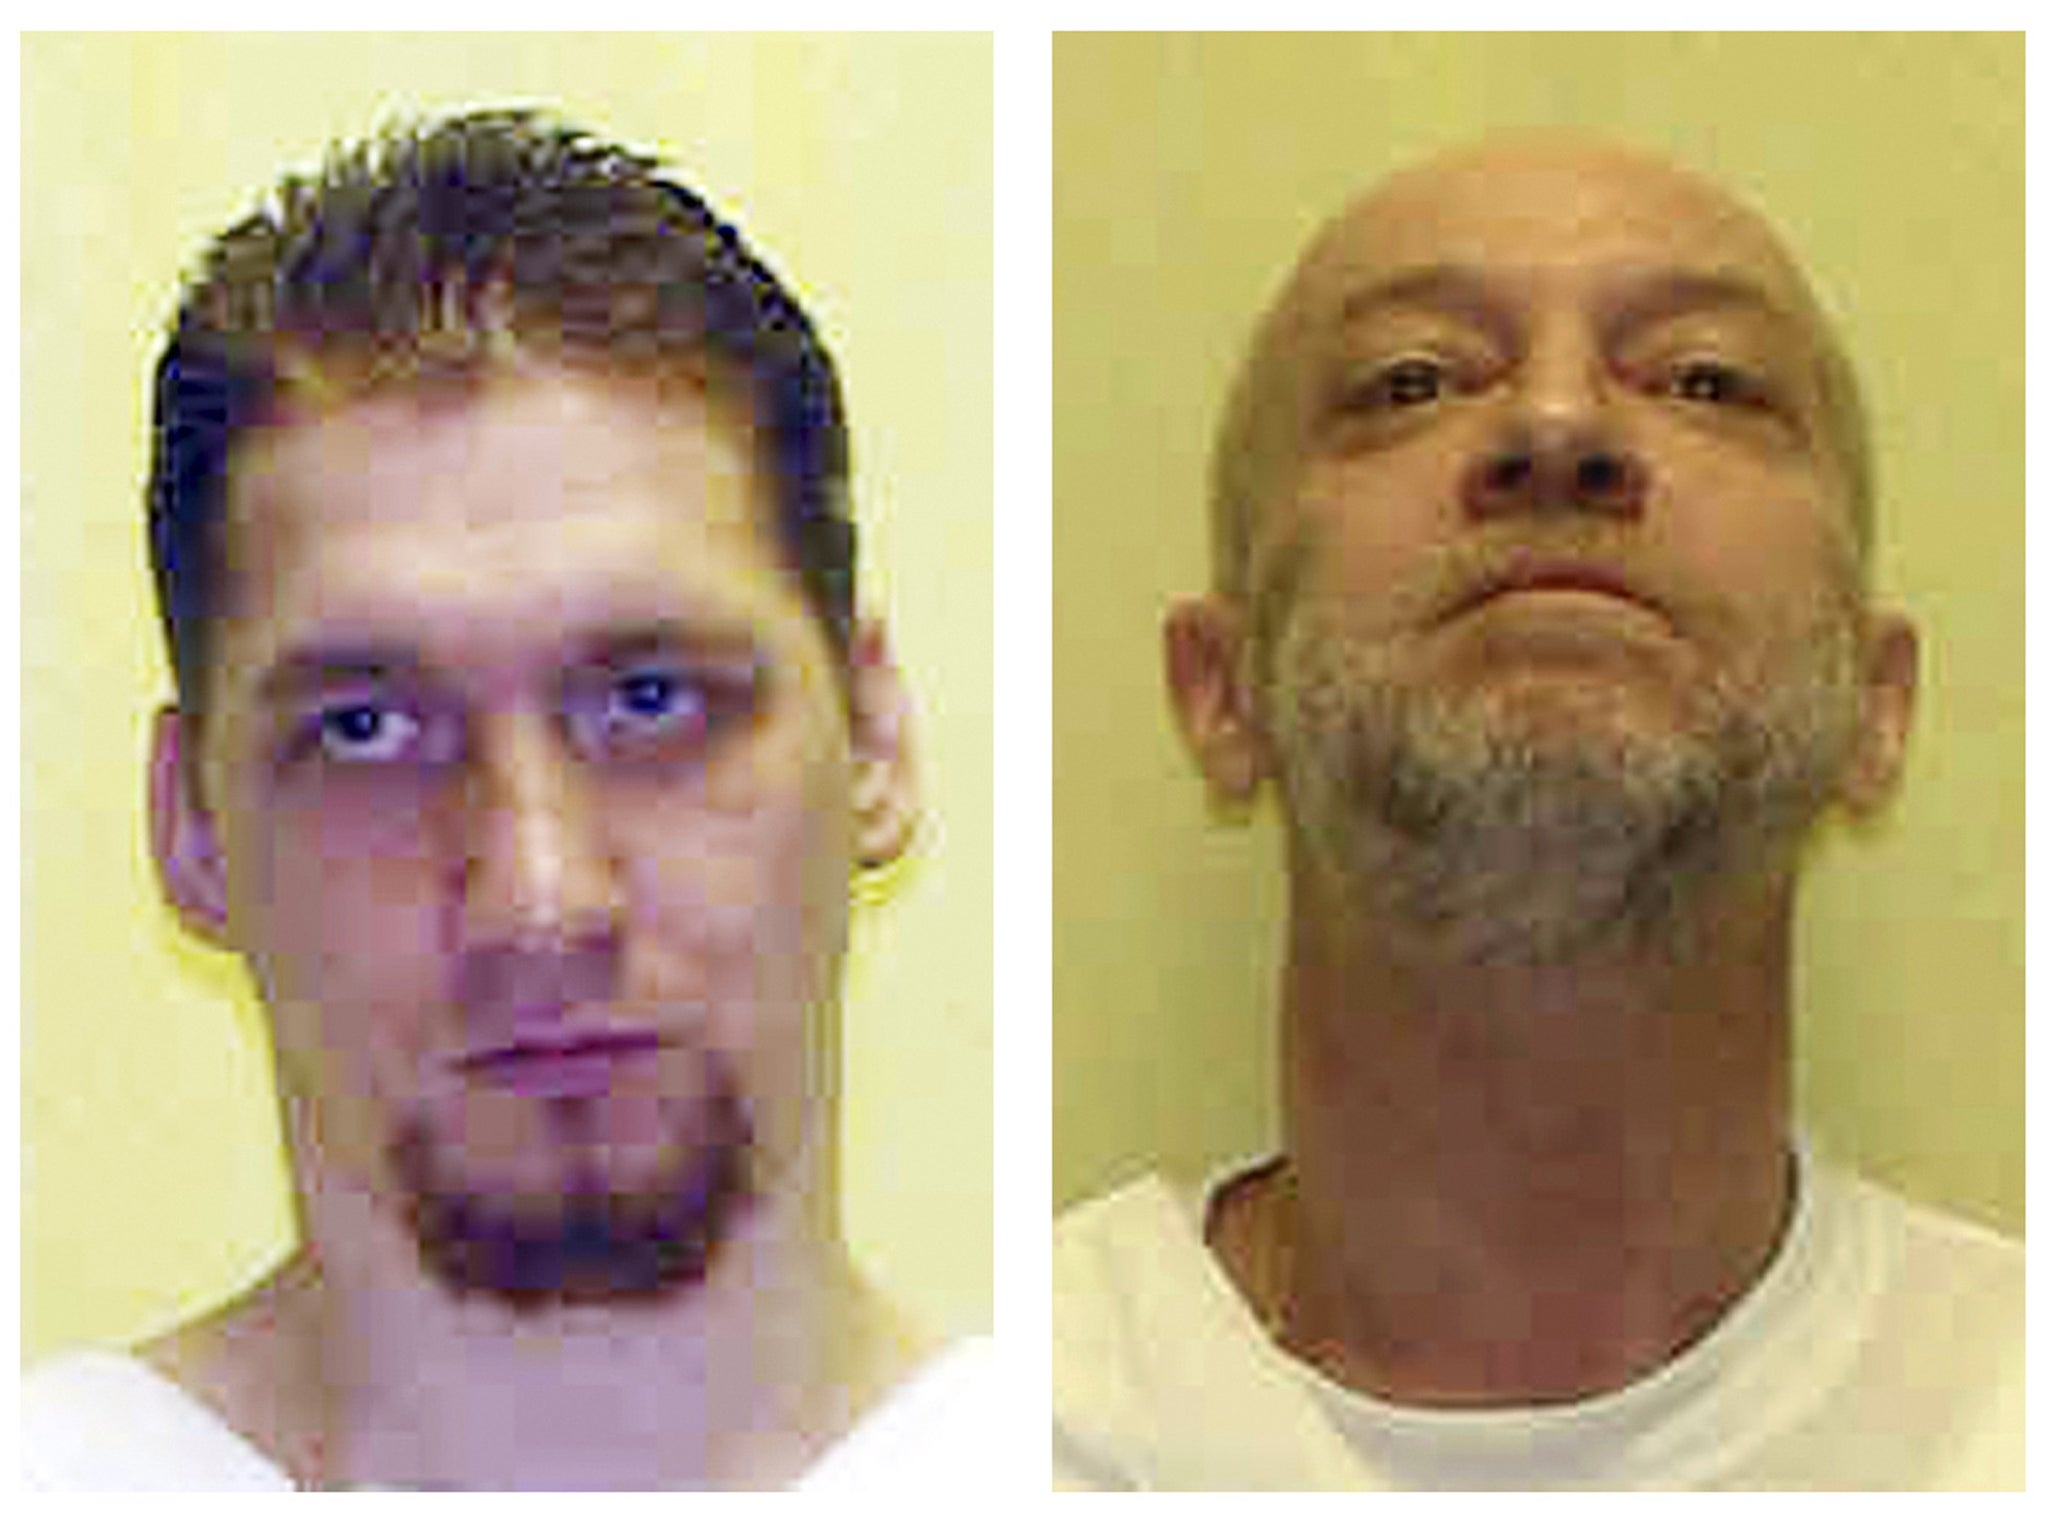 Death row inmates Ronald Phillips (left) and Raymond Tibbetts. Their executions are scheduled later this year but, with Ohio's supply of lethal injection drugs expiring, the state won't be able to carry out executions under its current system